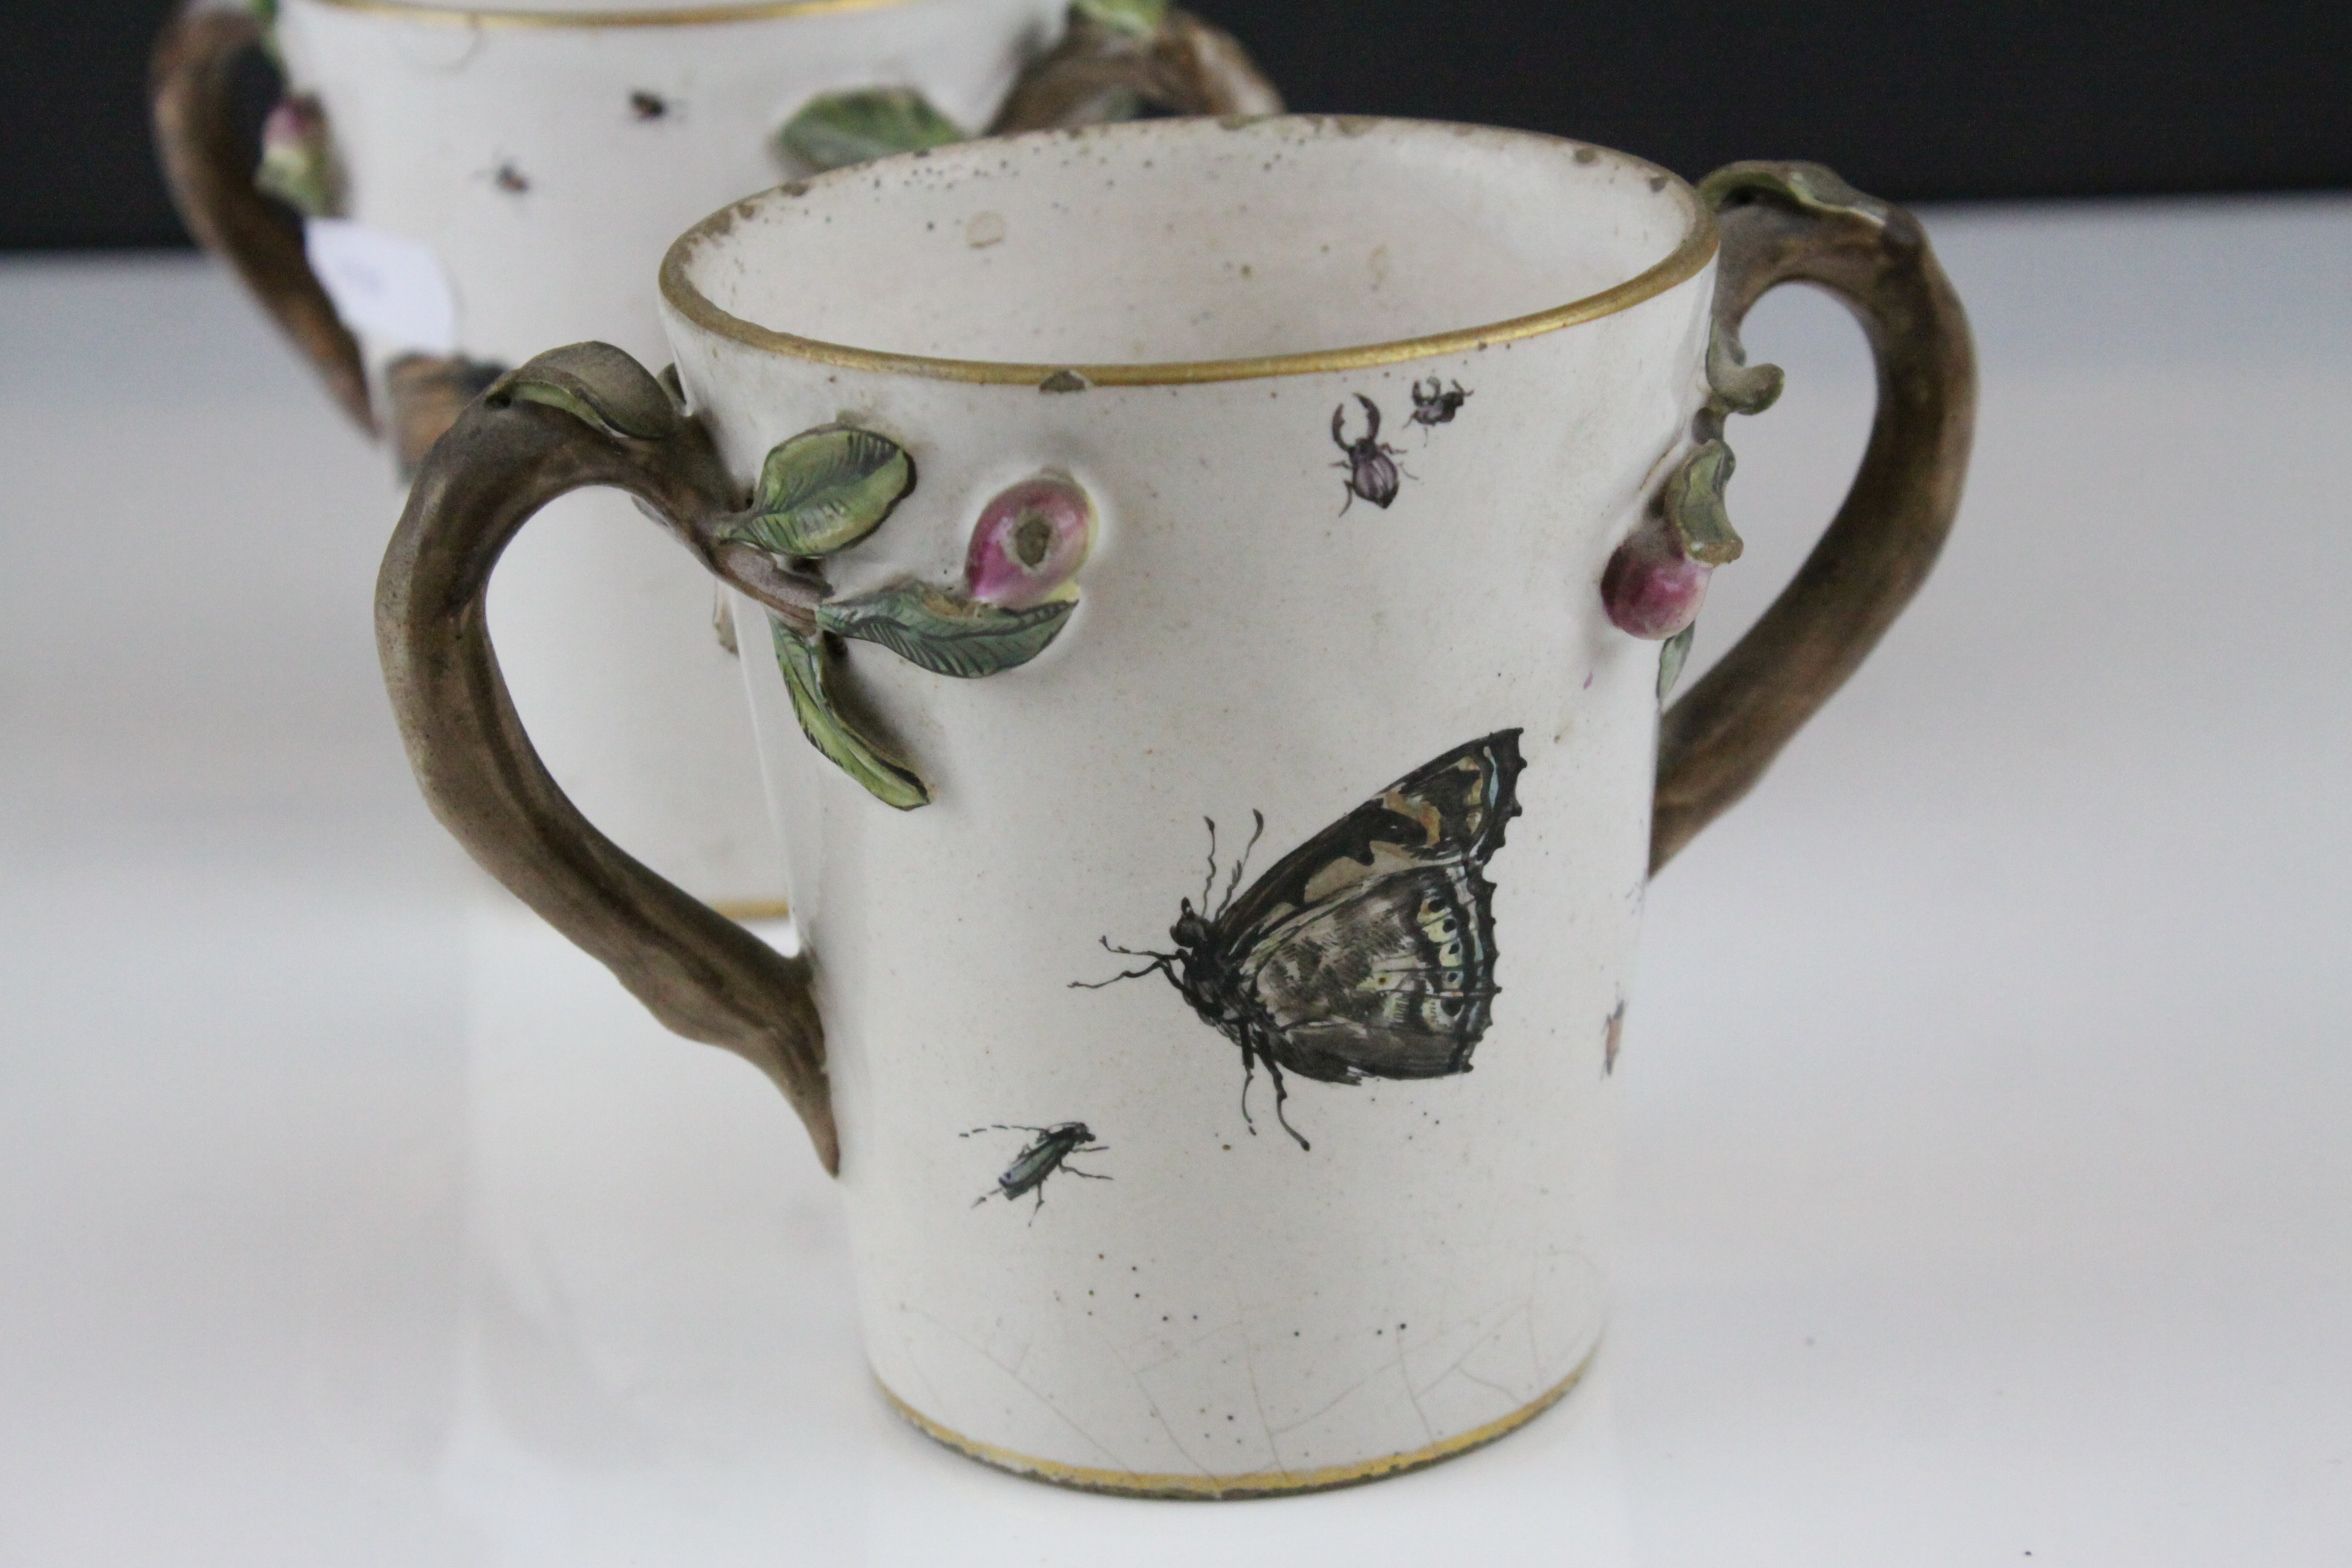 Pair of 19th century Continental Glazed Stoneware Twin Handled Mugs, the handles in the form of - Image 5 of 11